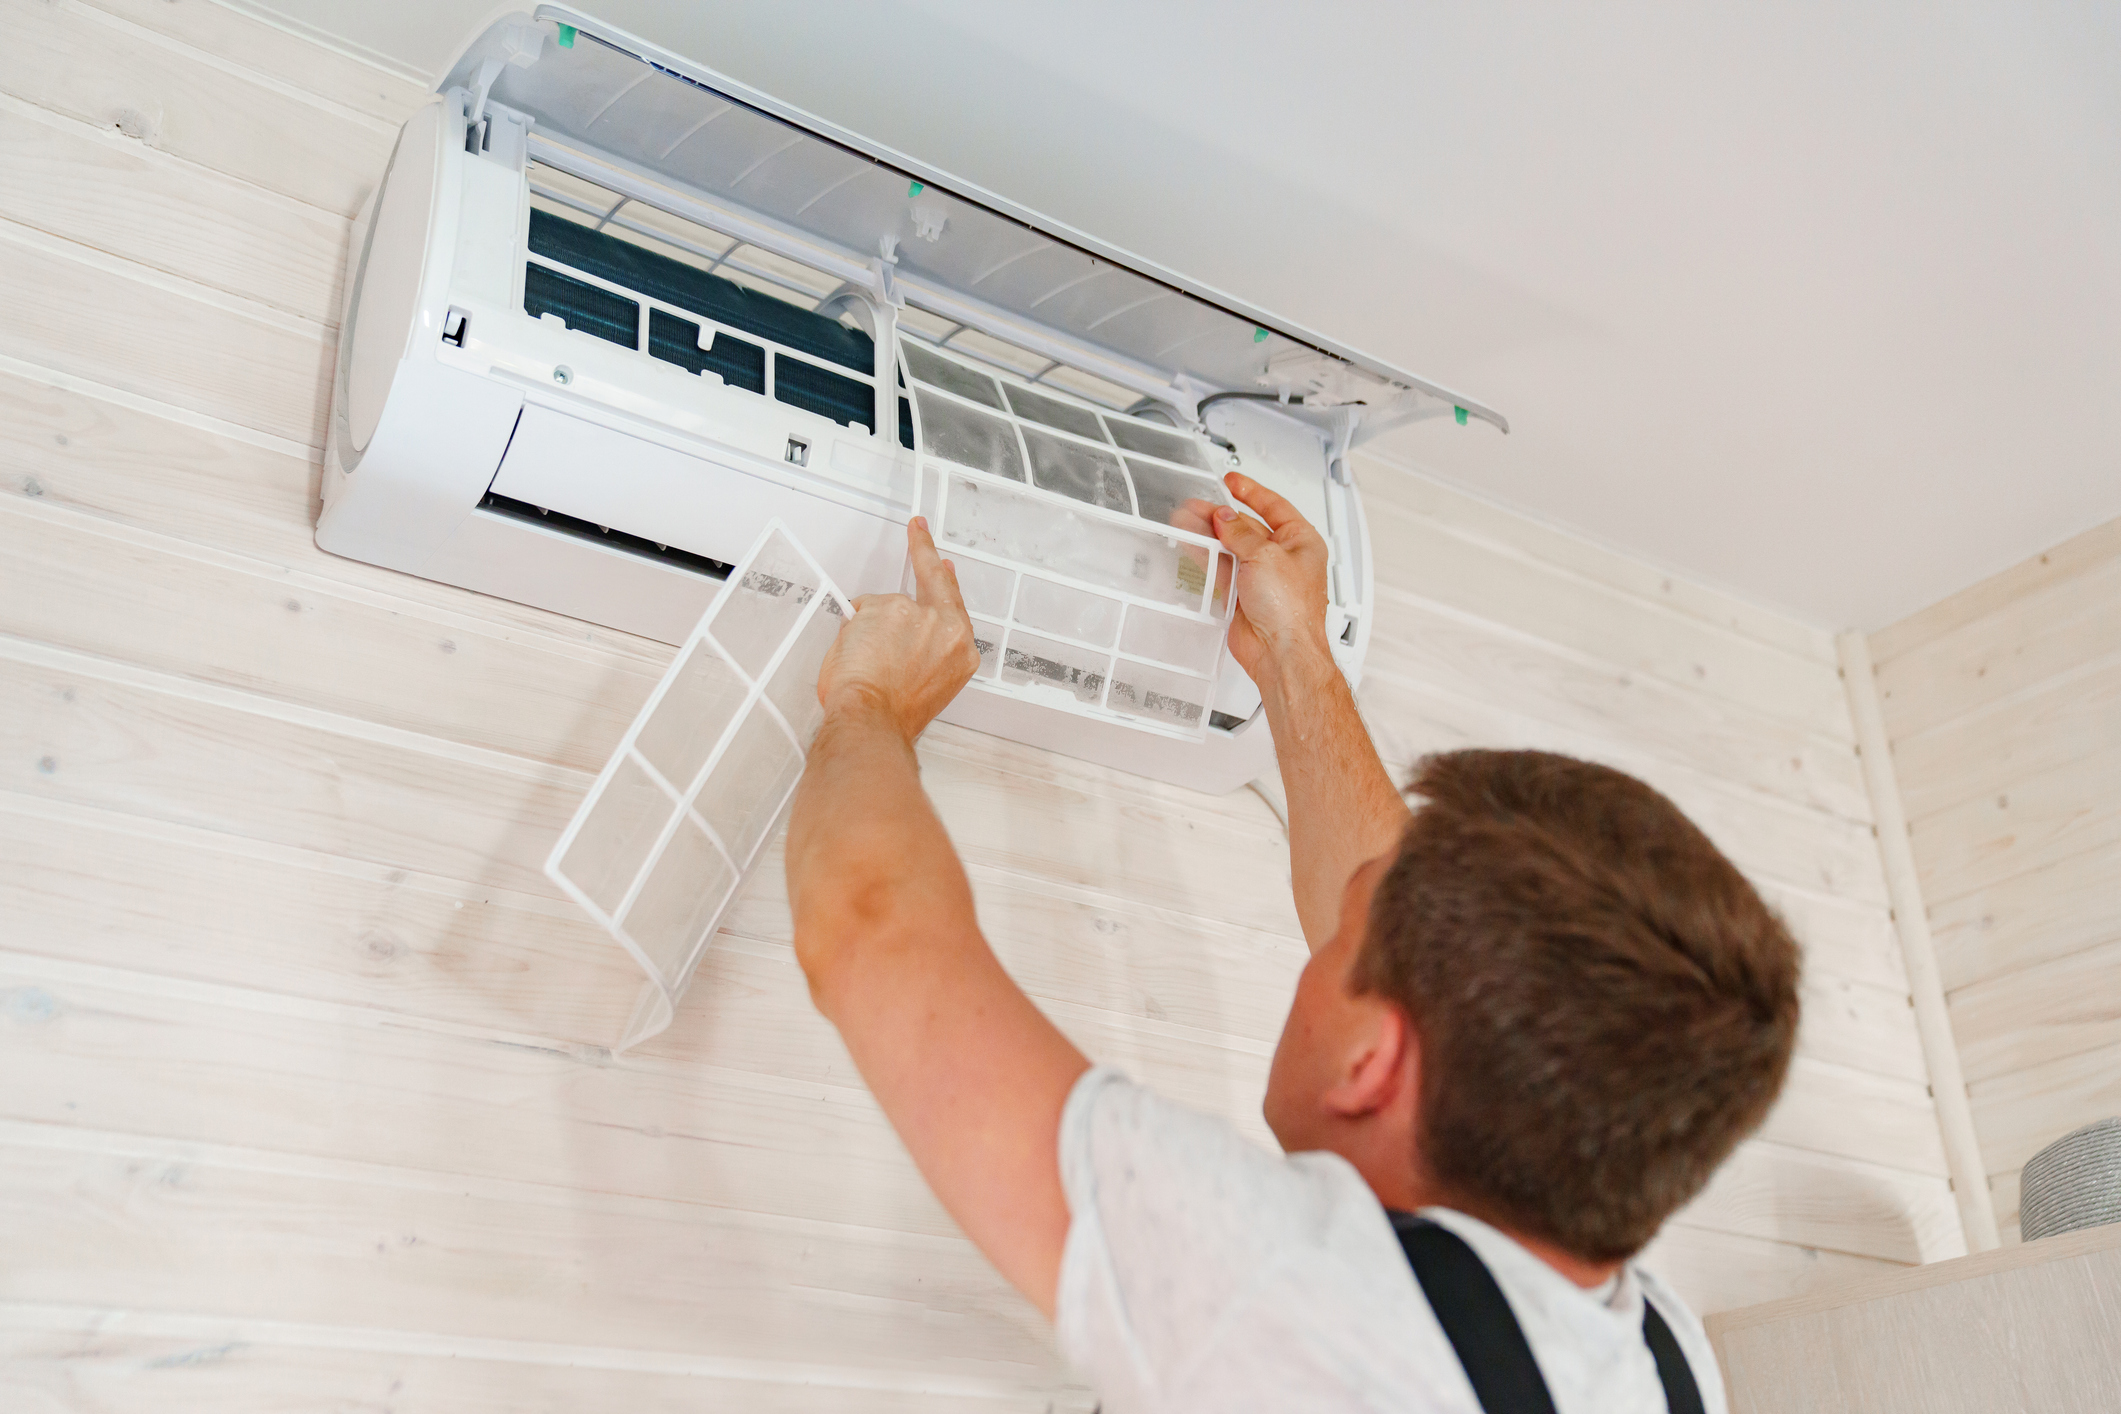 Recognizing When It’s Time for an Air Conditioning Replacement